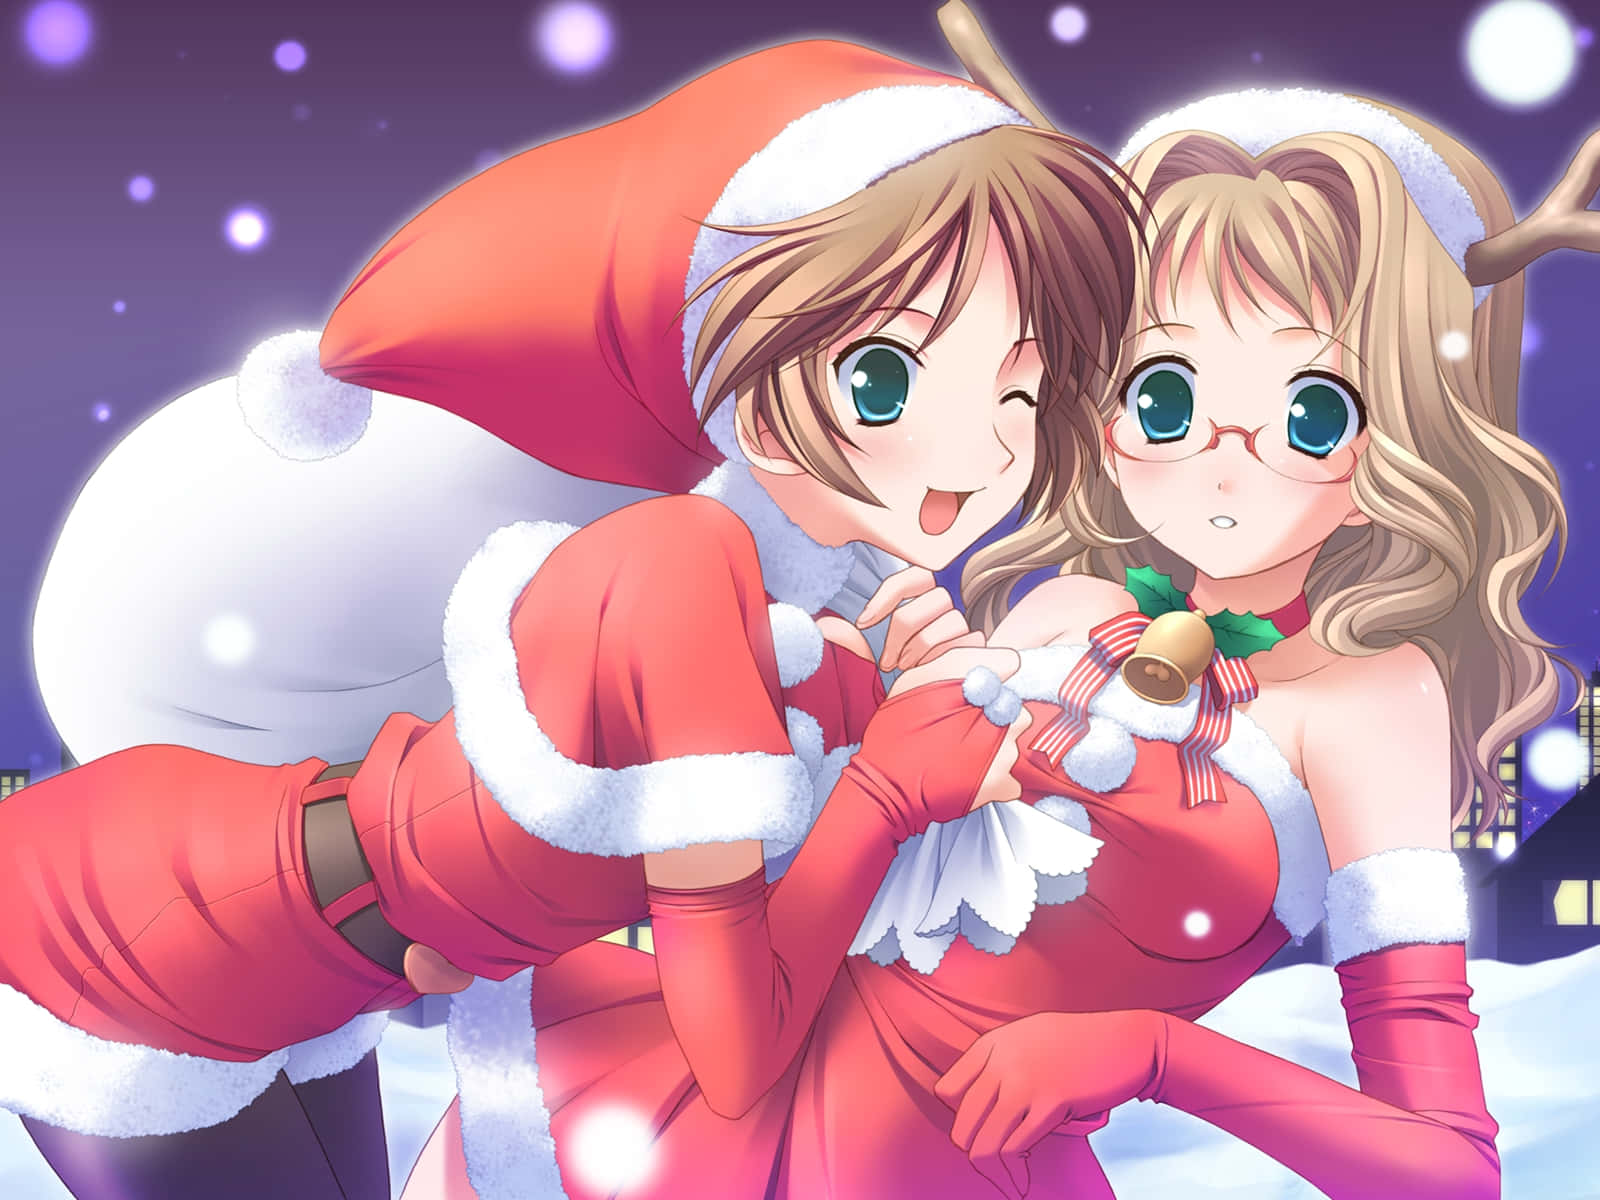 Celebrate Christmas with your favorite Anime characters!